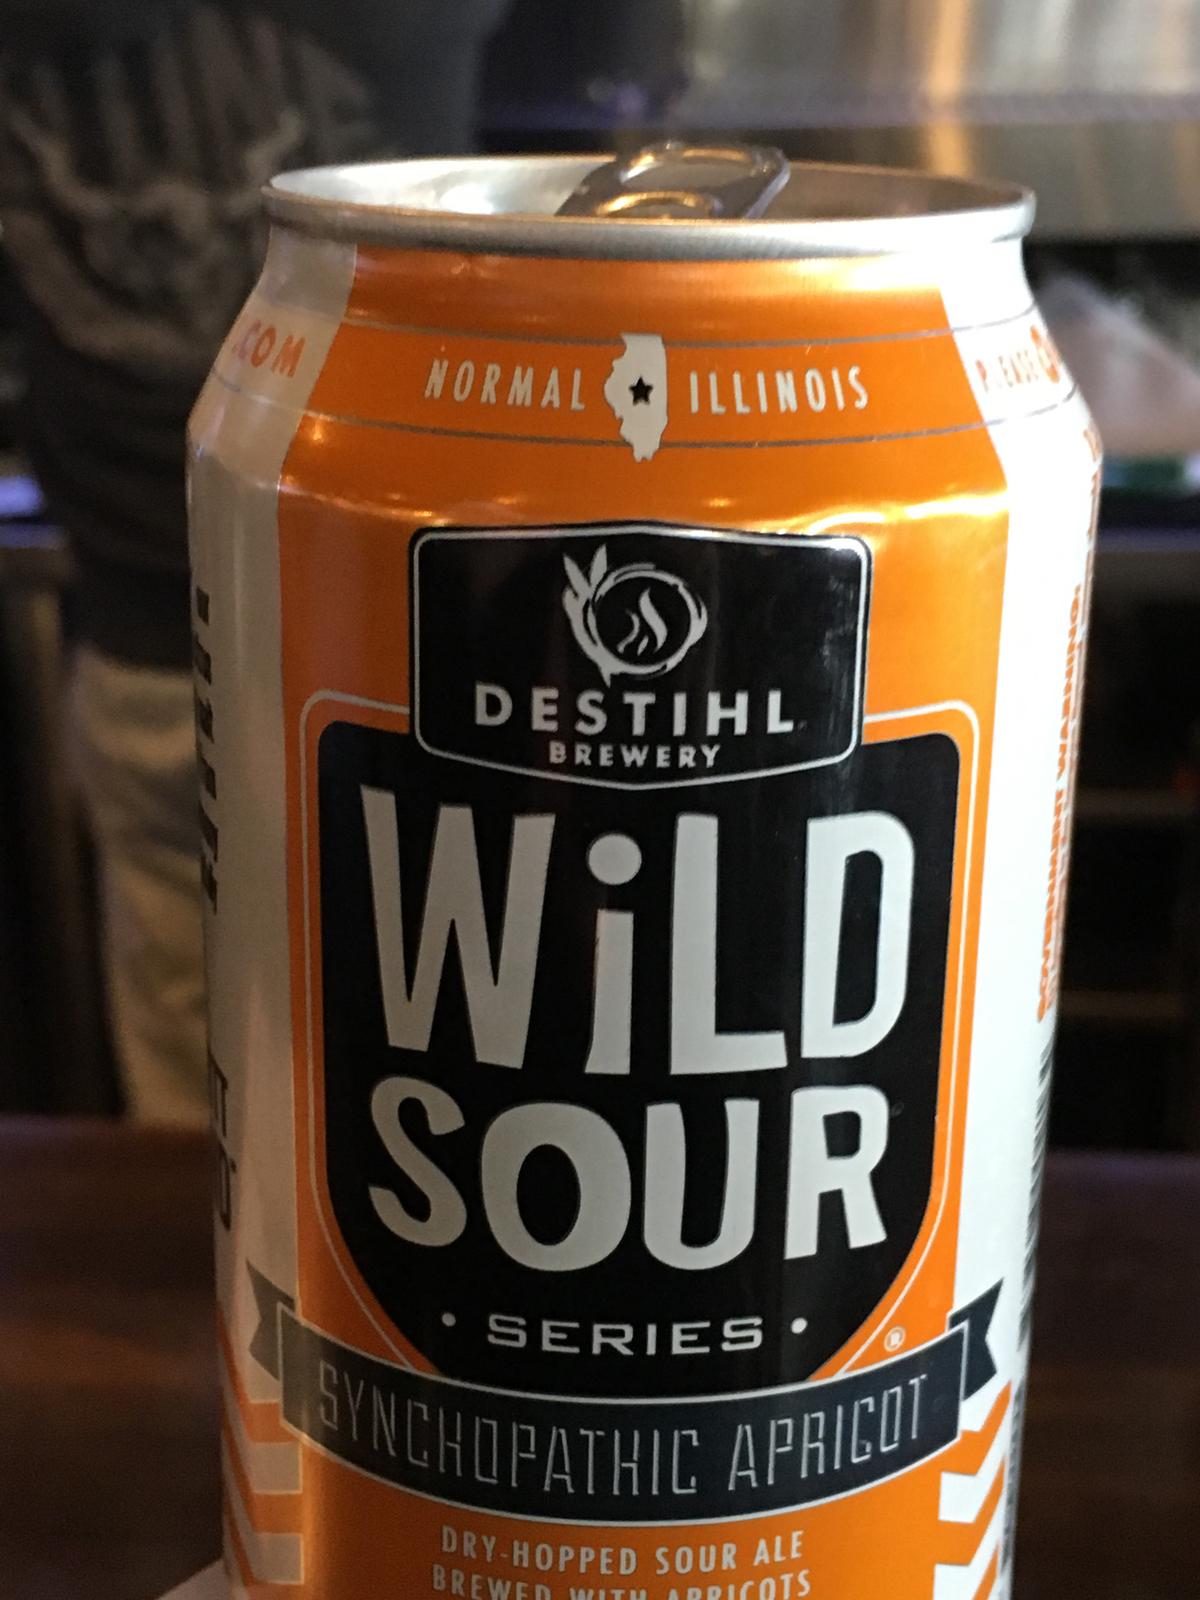 Wild Sour Series: Synchopathic Apricot